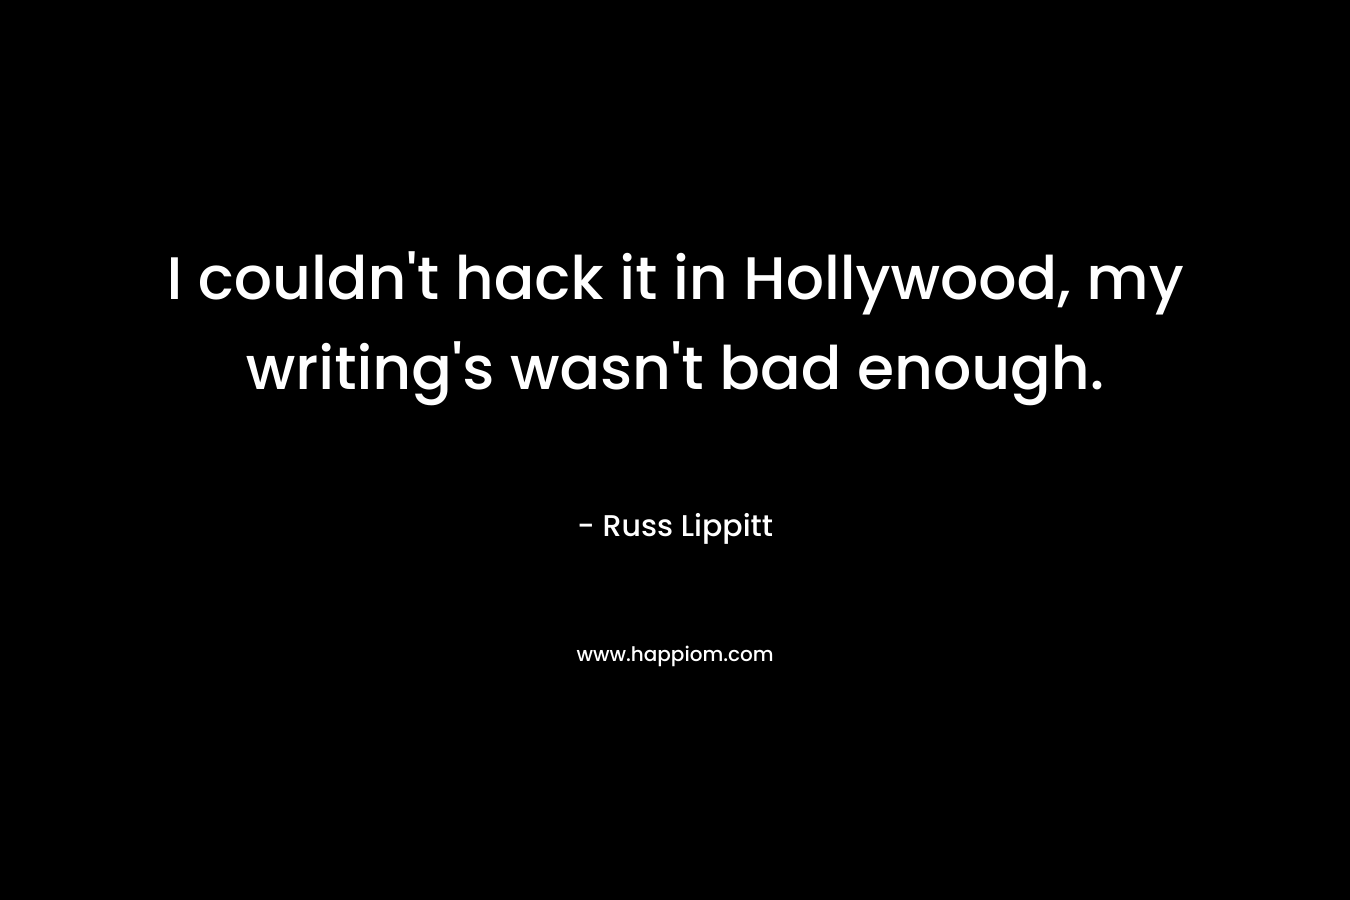 I couldn't hack it in Hollywood, my writing's wasn't bad enough.